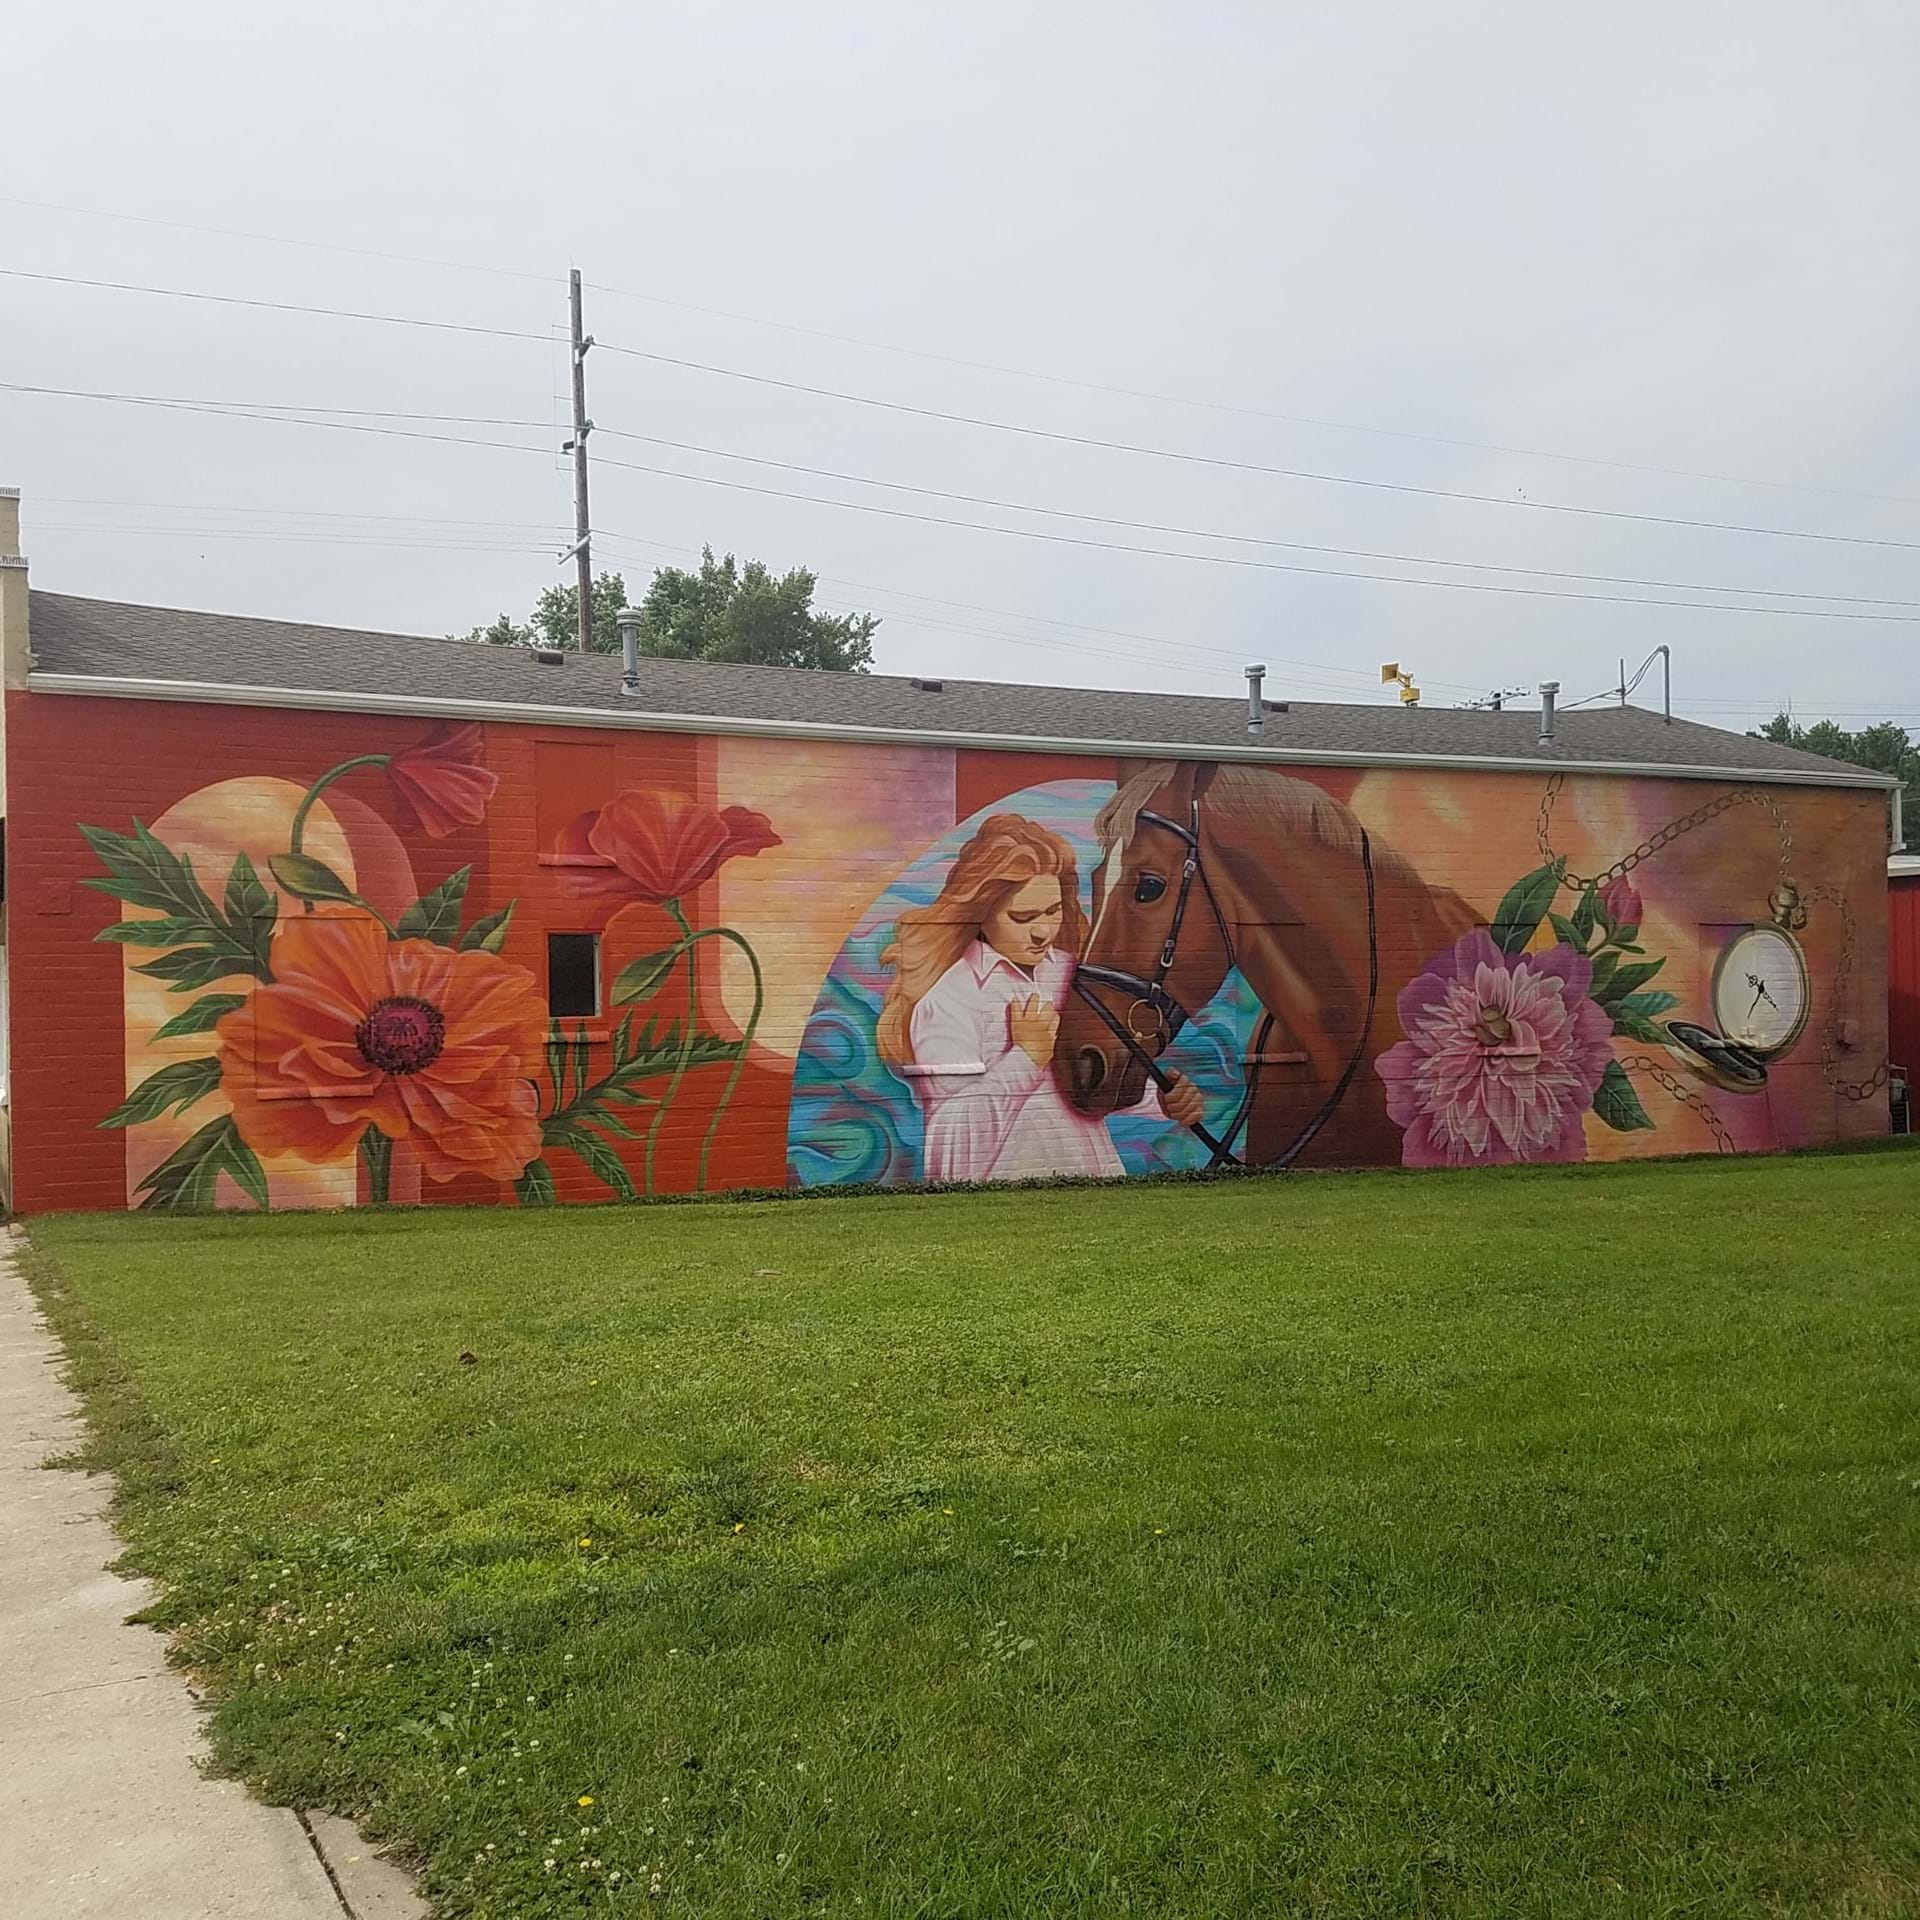 The Lenox Heritage Mural tells a story about Lenox's proud past